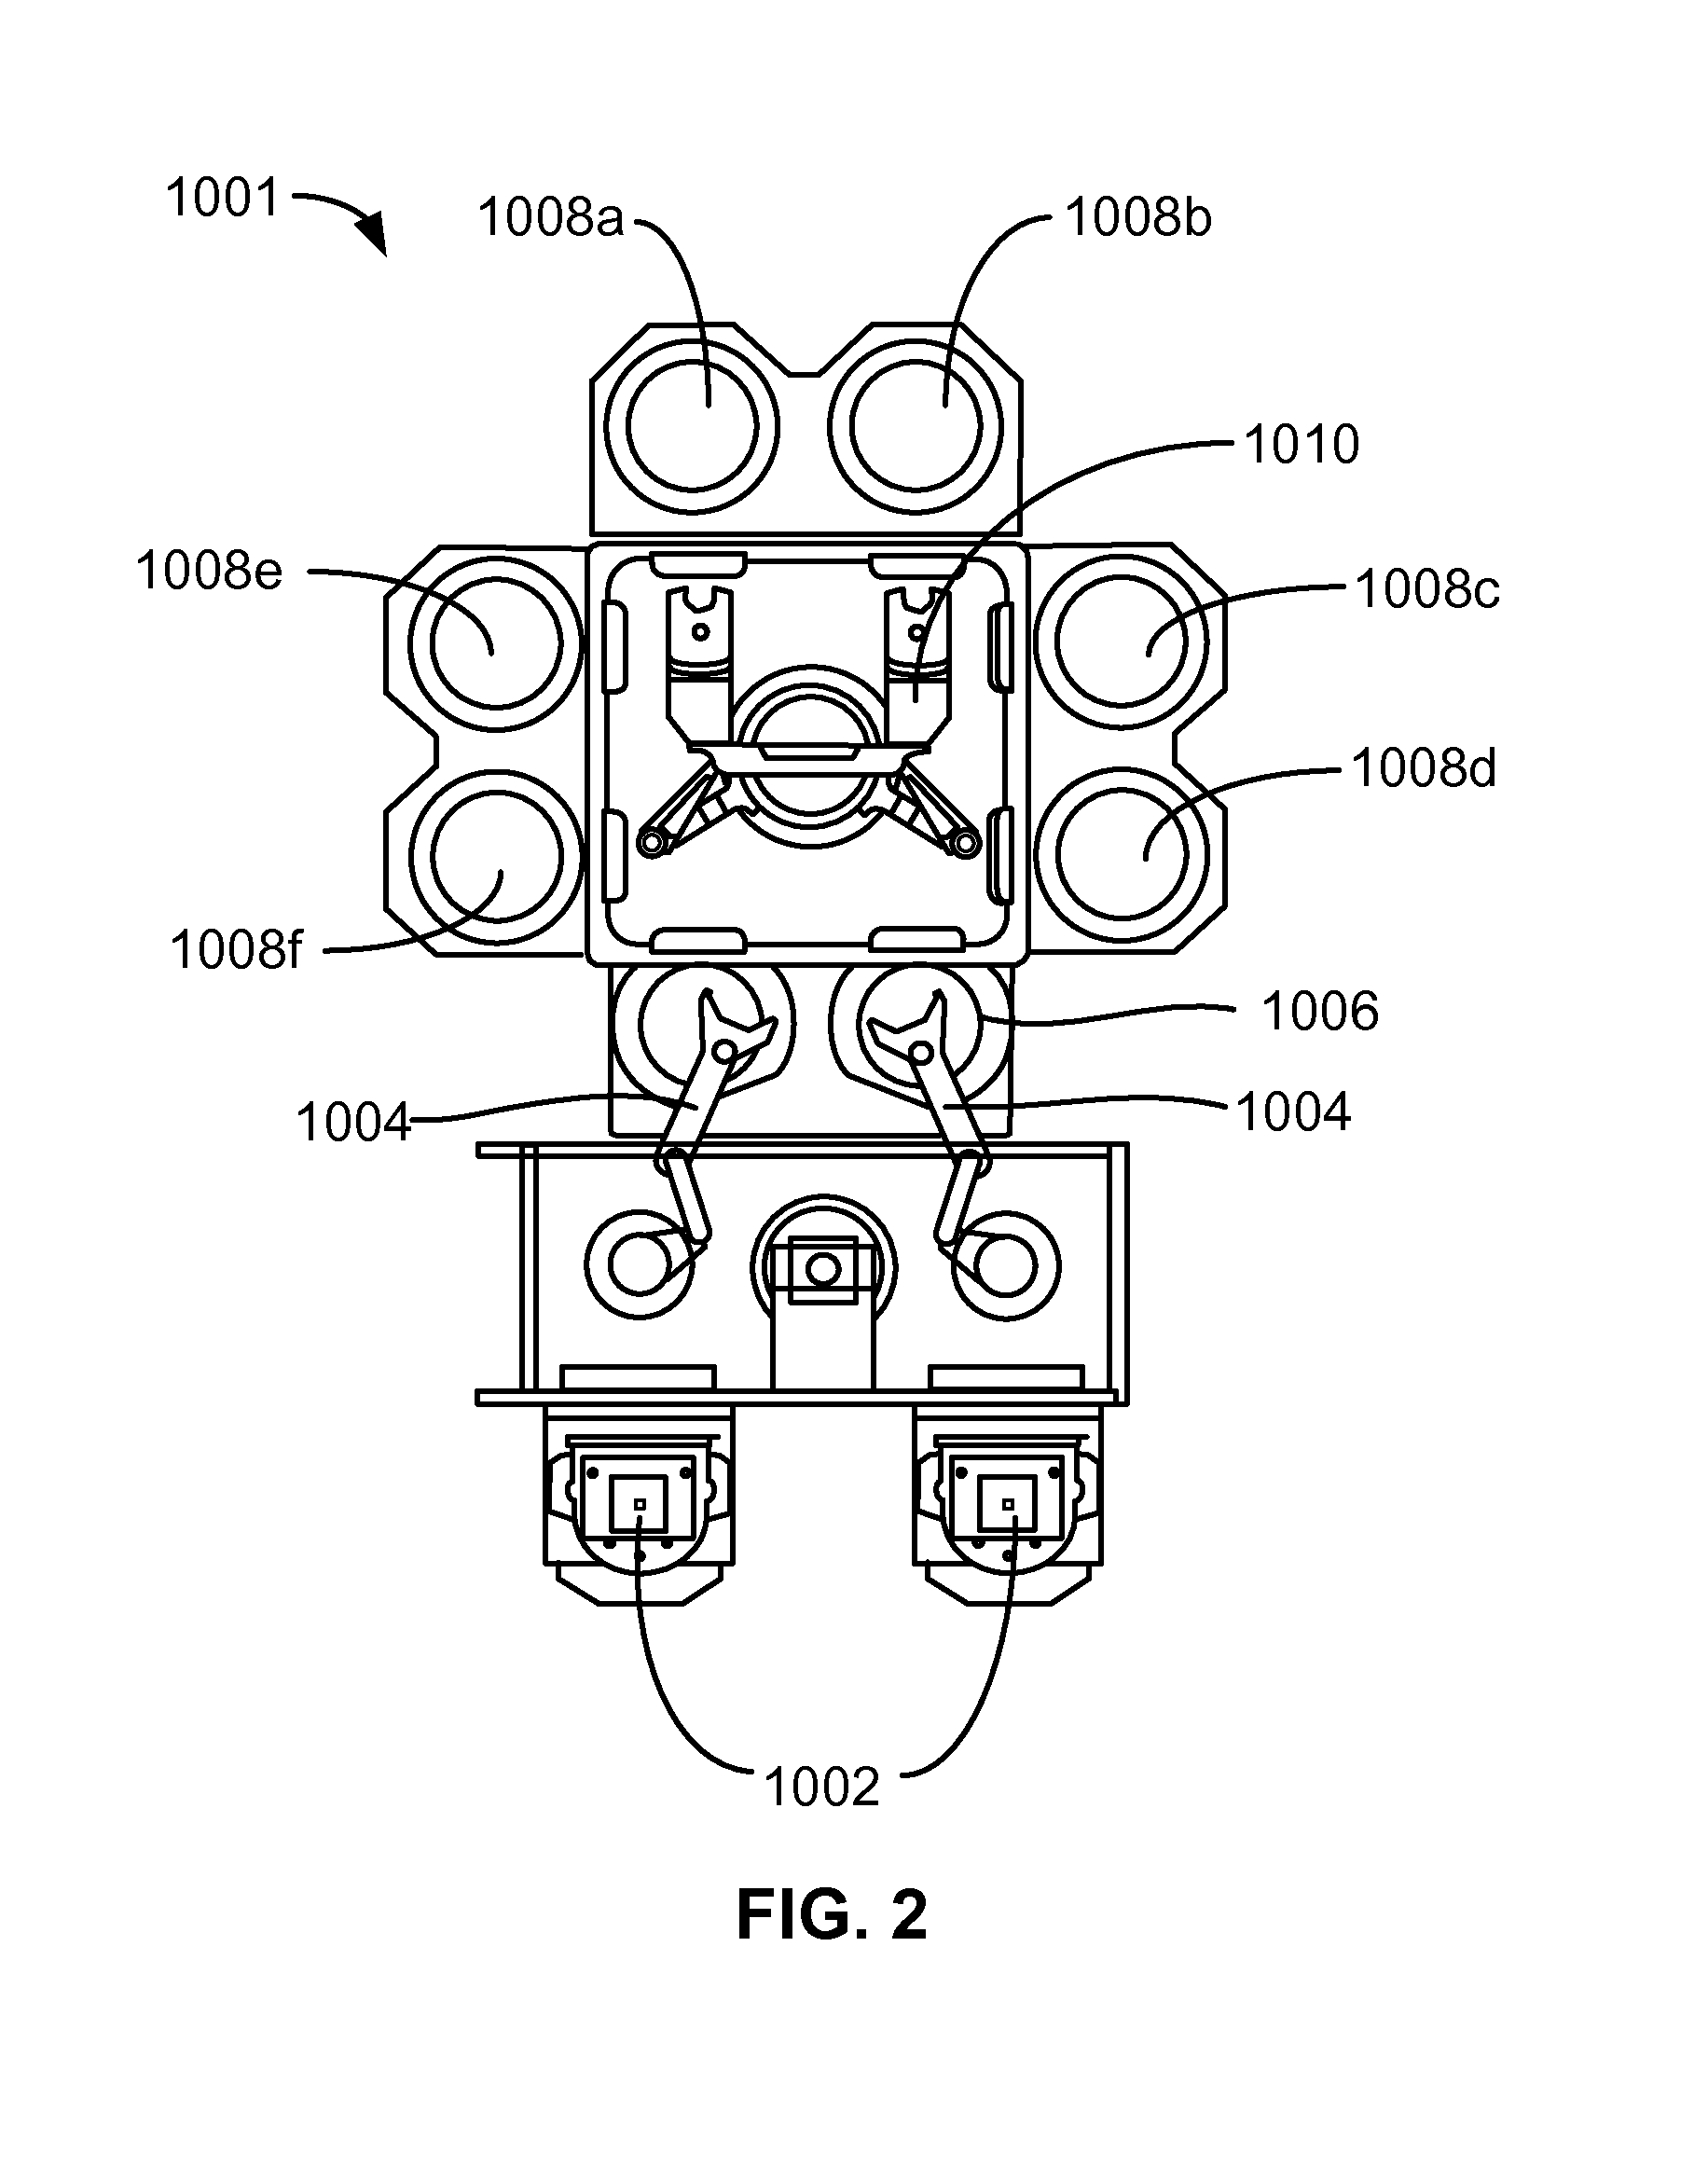 Flowable silicon-carbon-oxygen layers for semiconductor processing